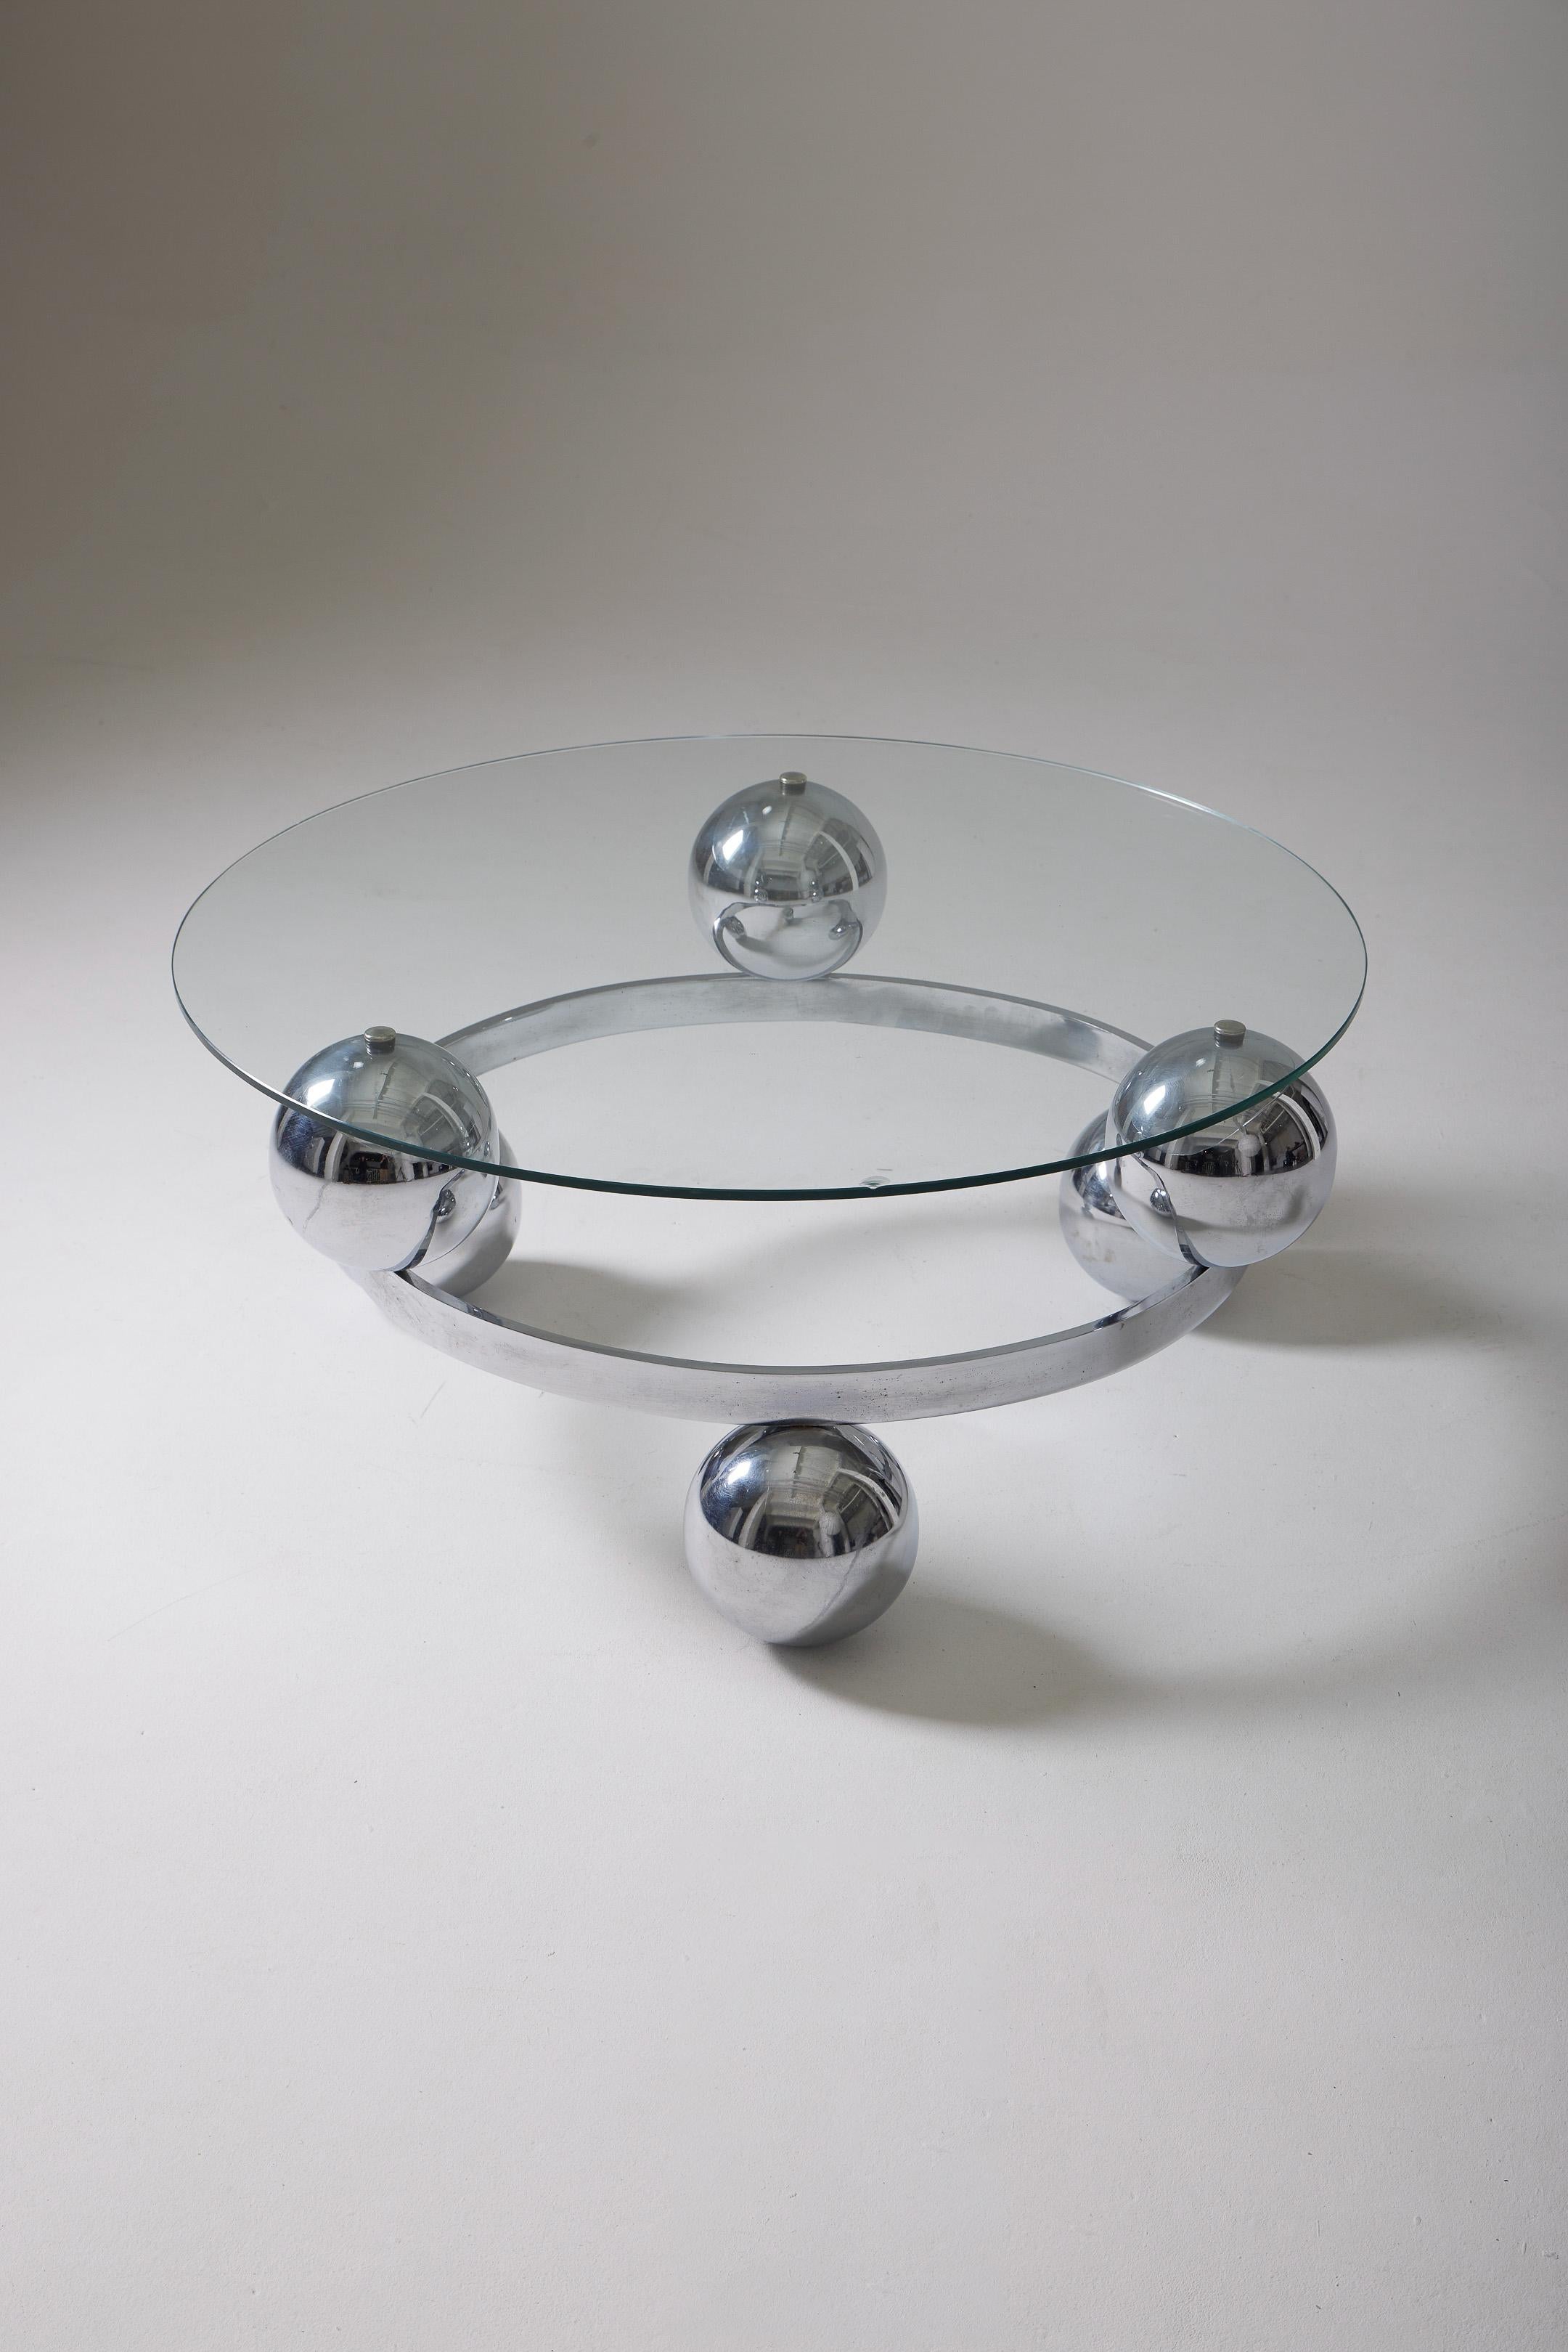 Round Space Age style coffee table reminiscent of Sputnik in the 1980s. The tabletop is made of glass and the structure is chrome metal, resembling the Atomium. Some impacts are to be noted (visible in the photos). Overall good condition.
LP2914